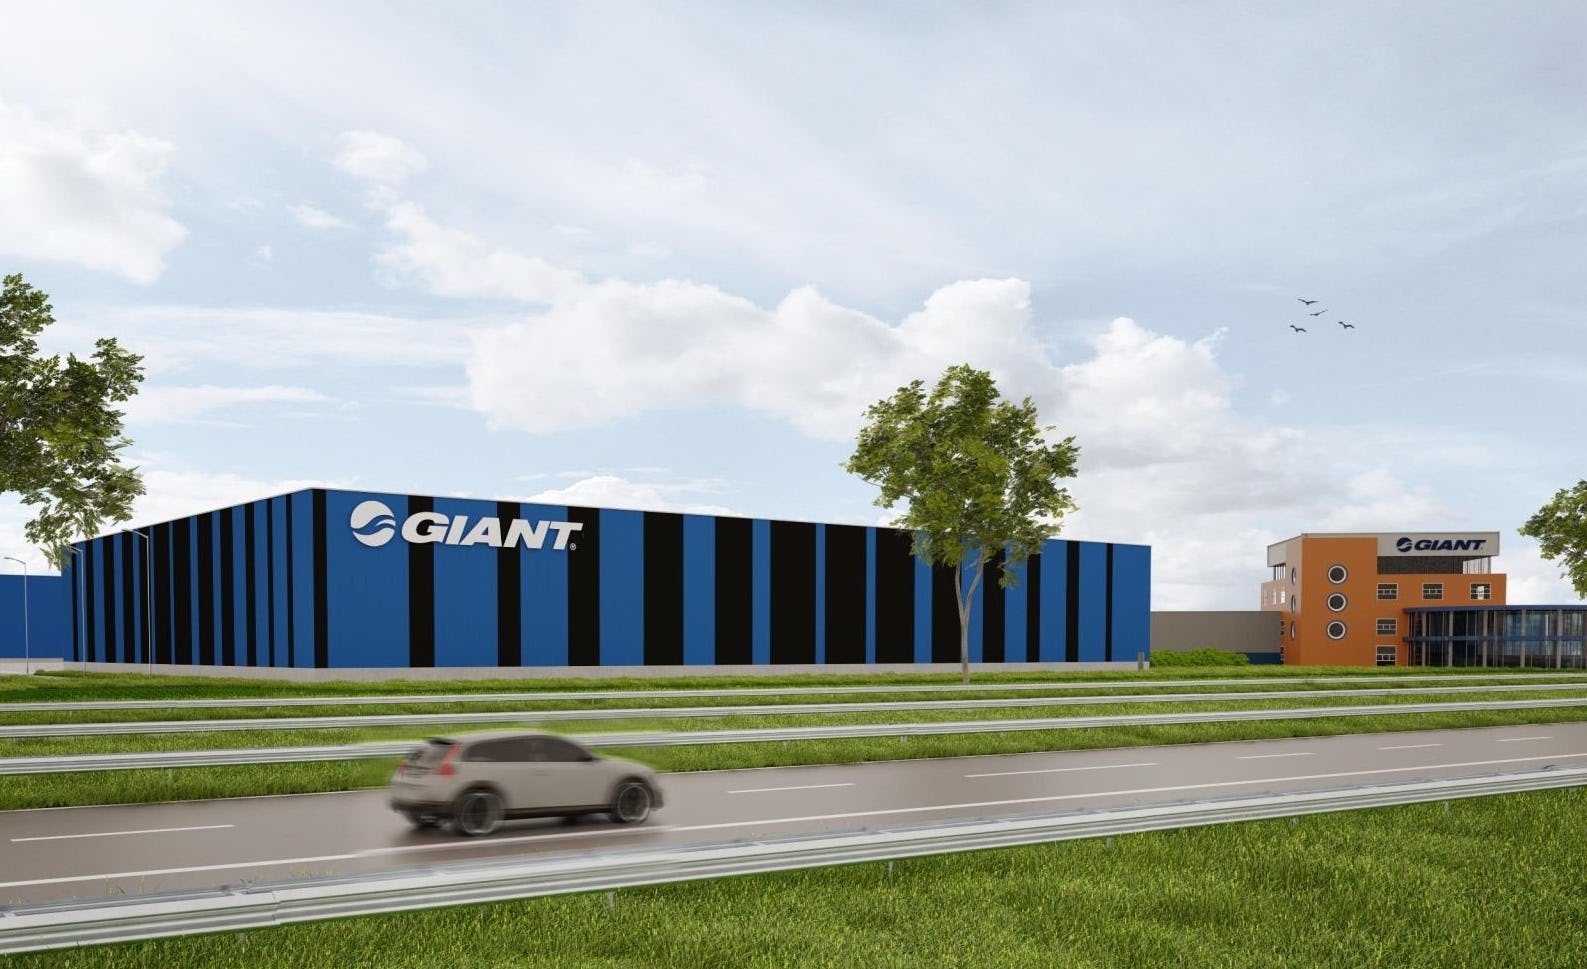 On completion, Giant’s distribution centre in the Netherlands will have a storage capacity of 17,000 square meters. - Photo Unibouw 